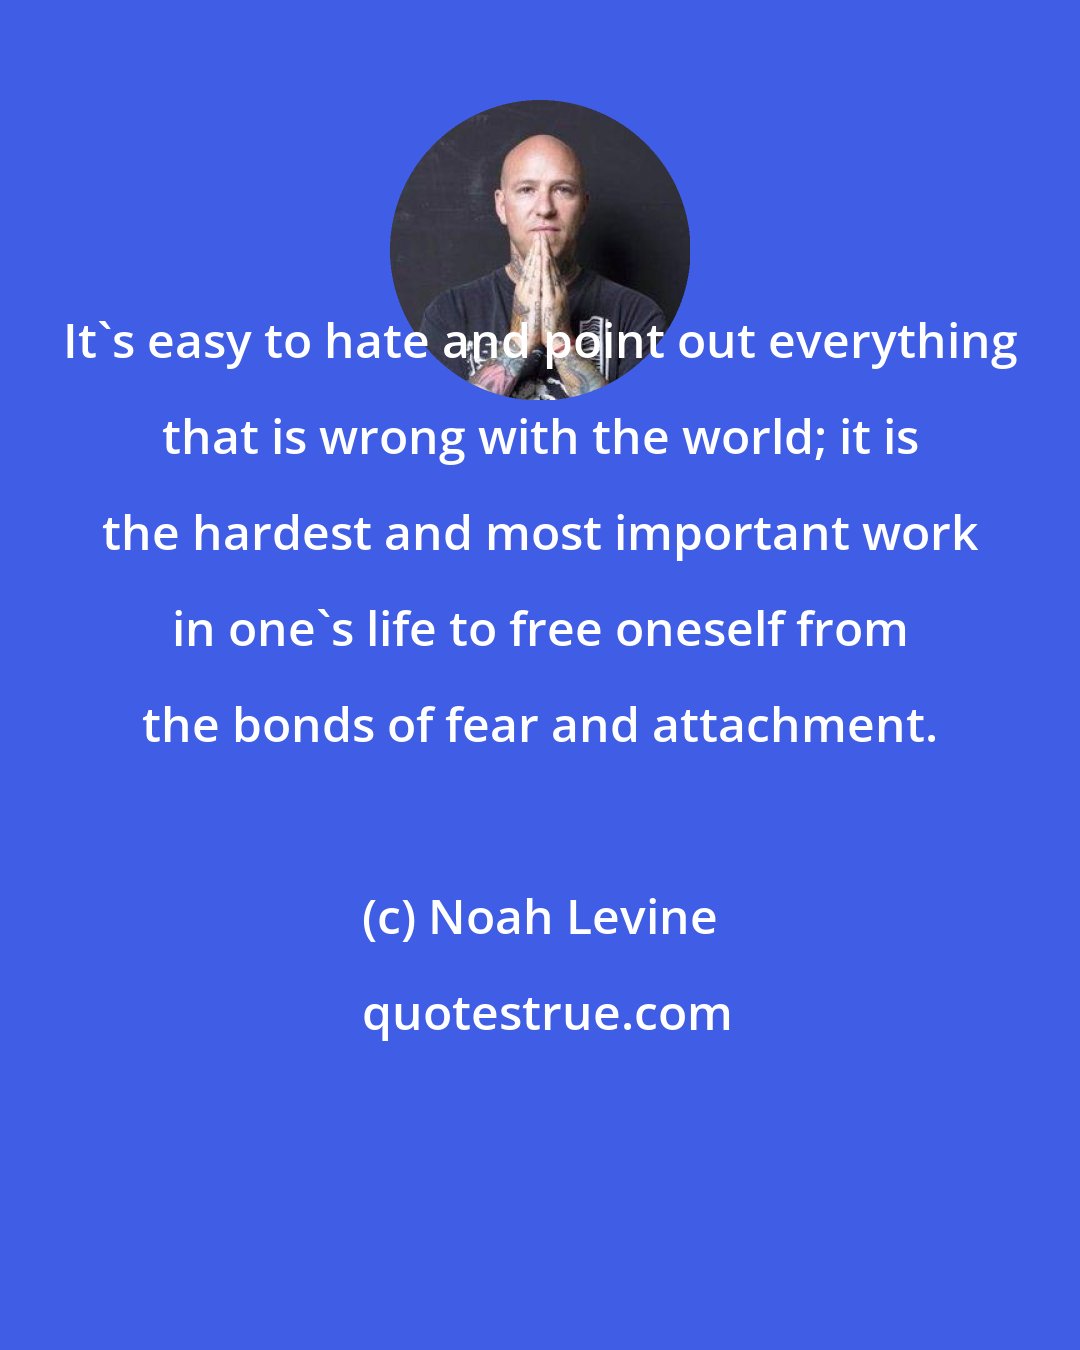 Noah Levine: It's easy to hate and point out everything that is wrong with the world; it is the hardest and most important work in one's life to free oneself from the bonds of fear and attachment.